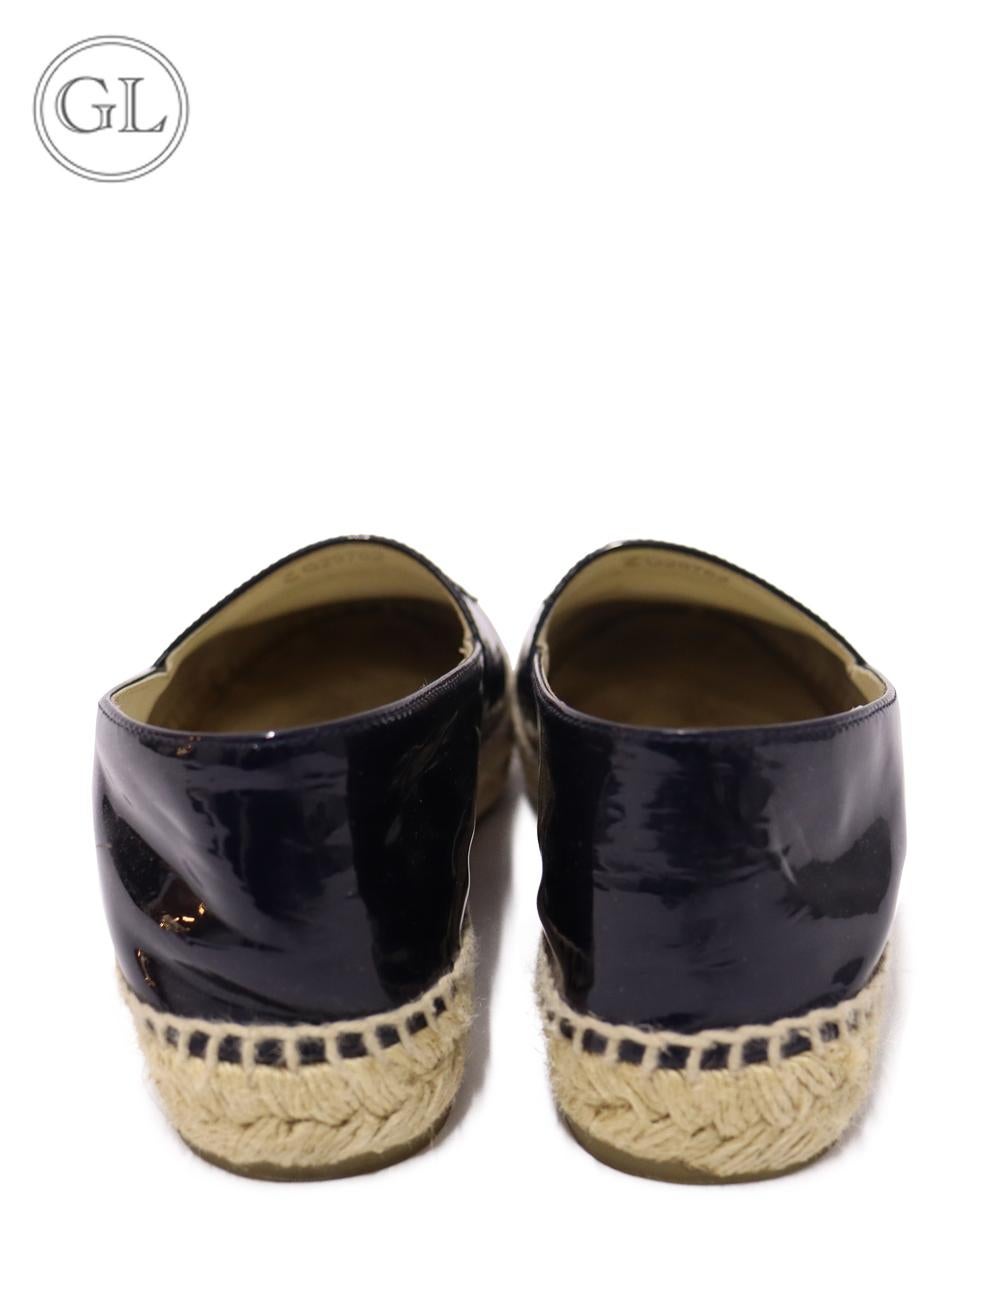 Chanel Navy Patent Lambskin Leather Espadrilles, detailed with the 'CC' interlocked logo on the front.

Material: Leather.
Size: EU 38
Overall Condition: Very Good.
Interior Condition: Signs of wear.
Exterior Condition: Barely there signs of use.